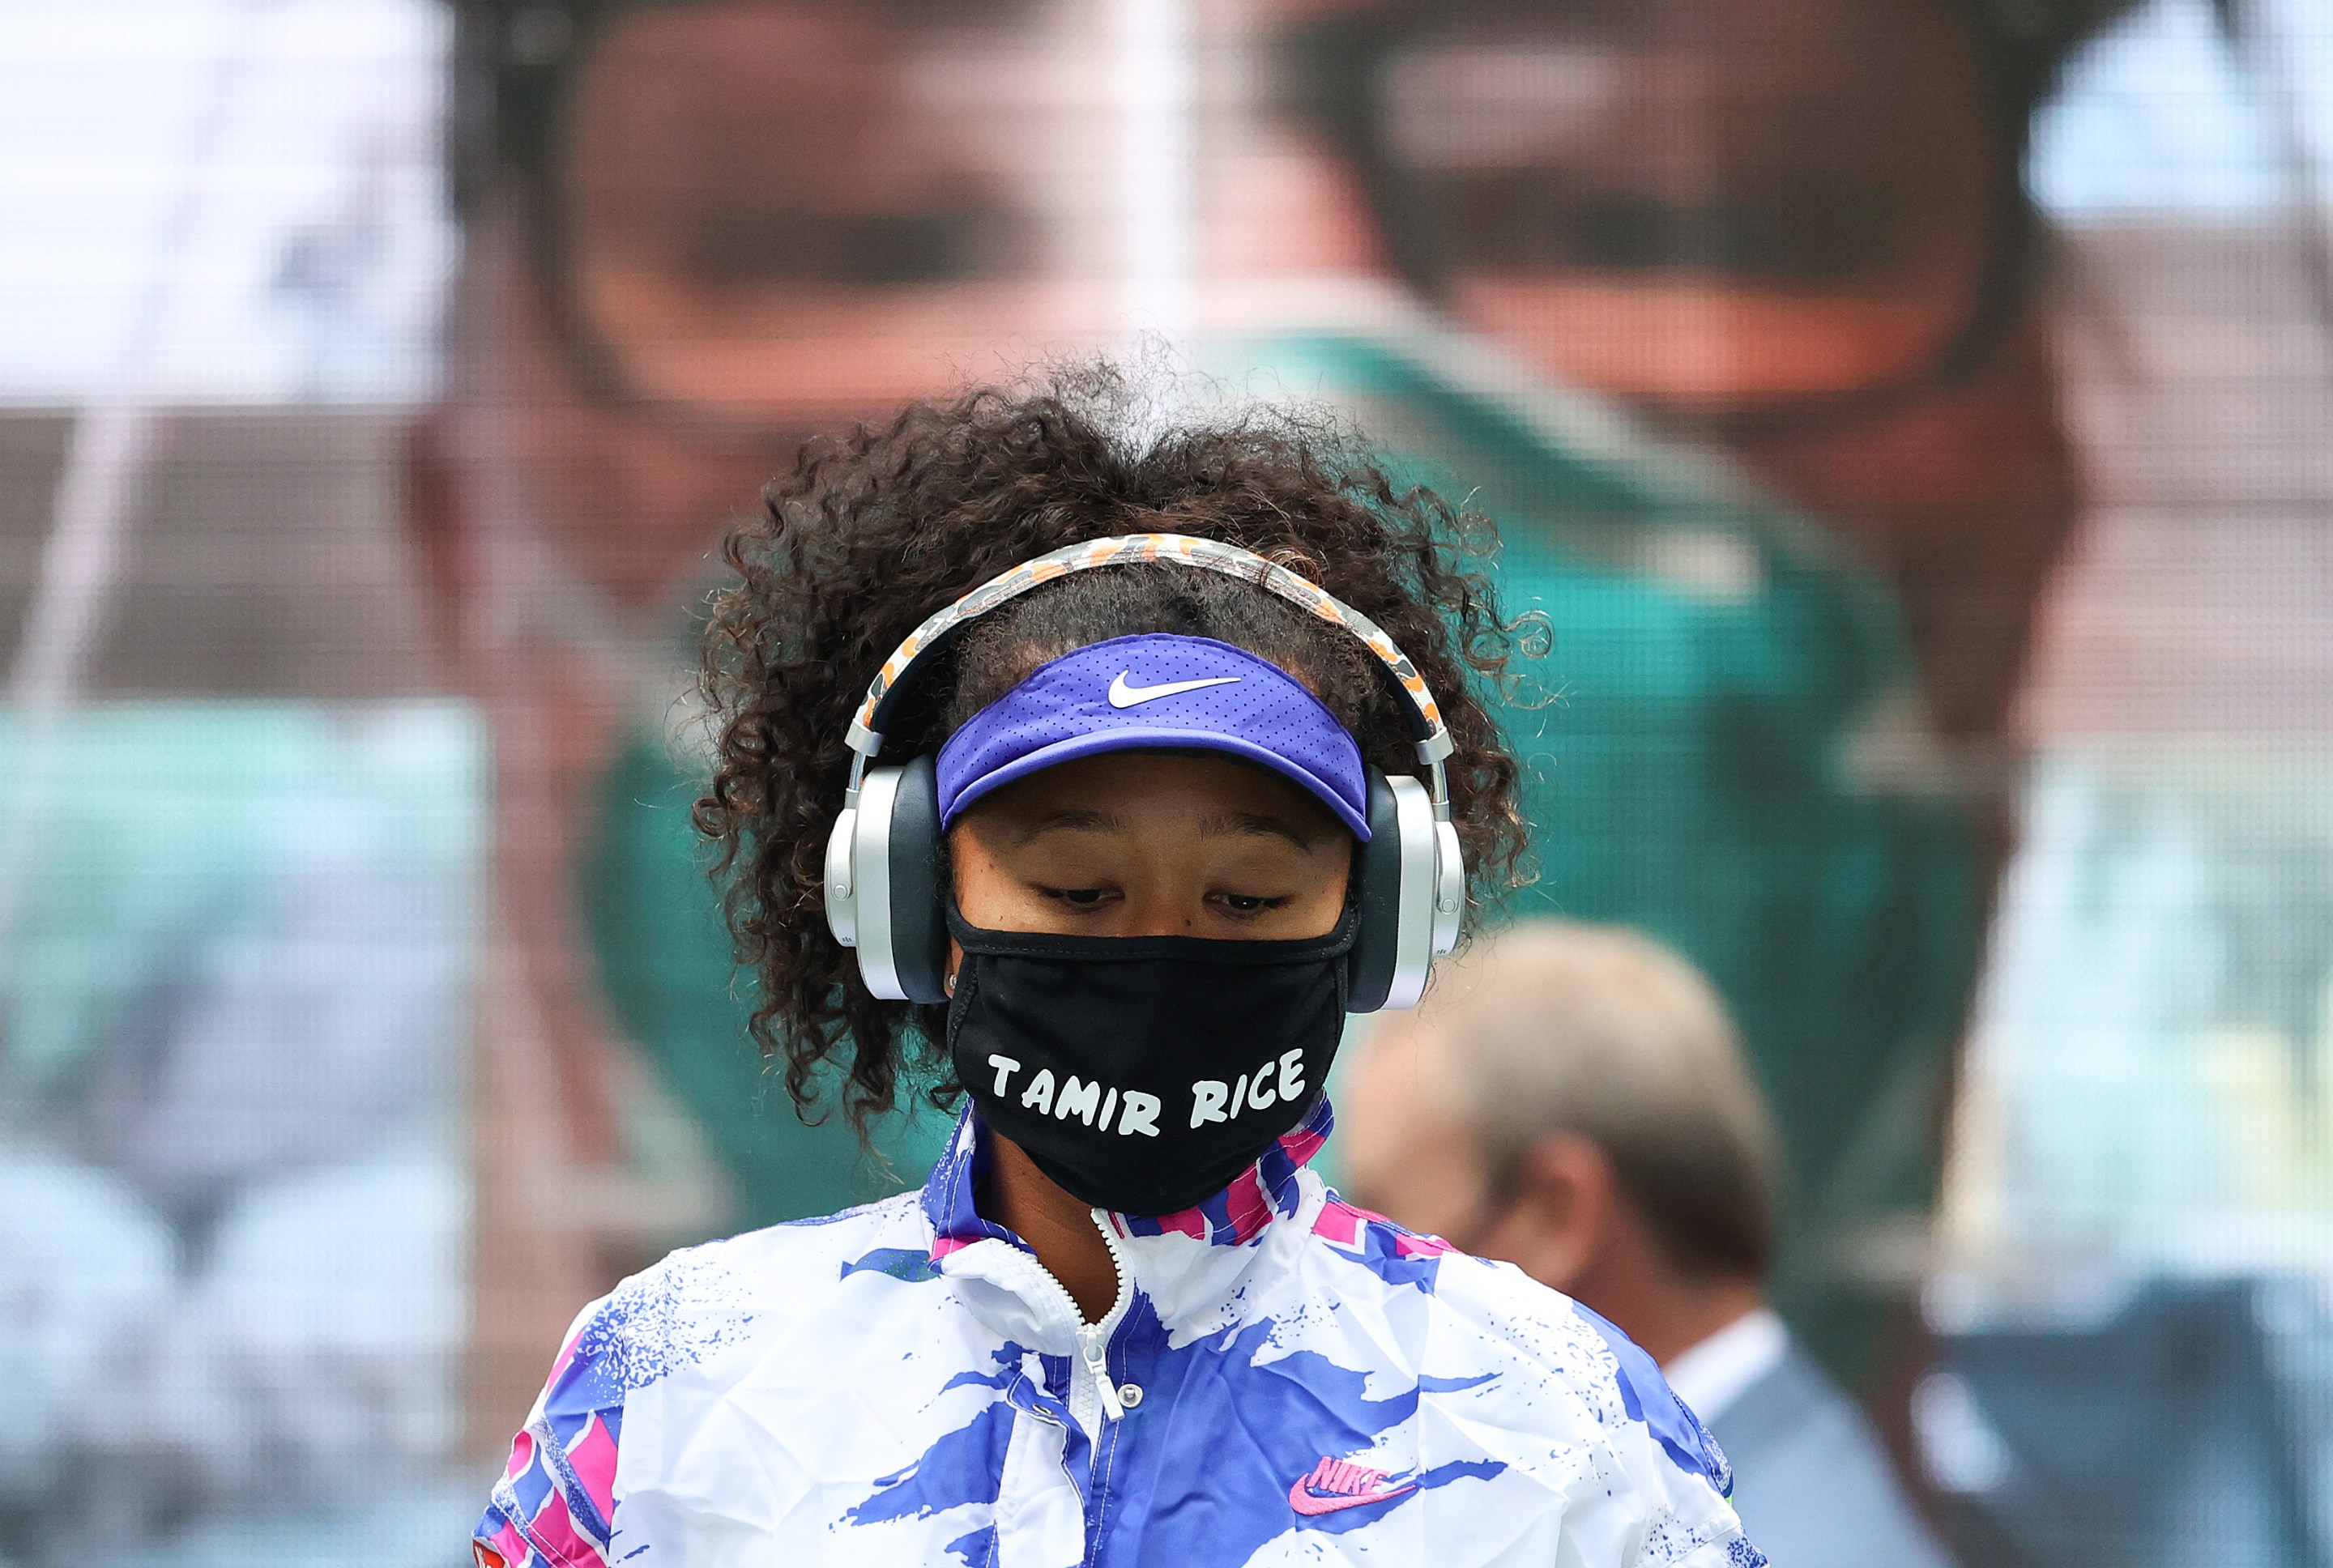 Naomi Osaka wears a mask with the name of Tamir Rice, who was killed in a 2014 police shooting.